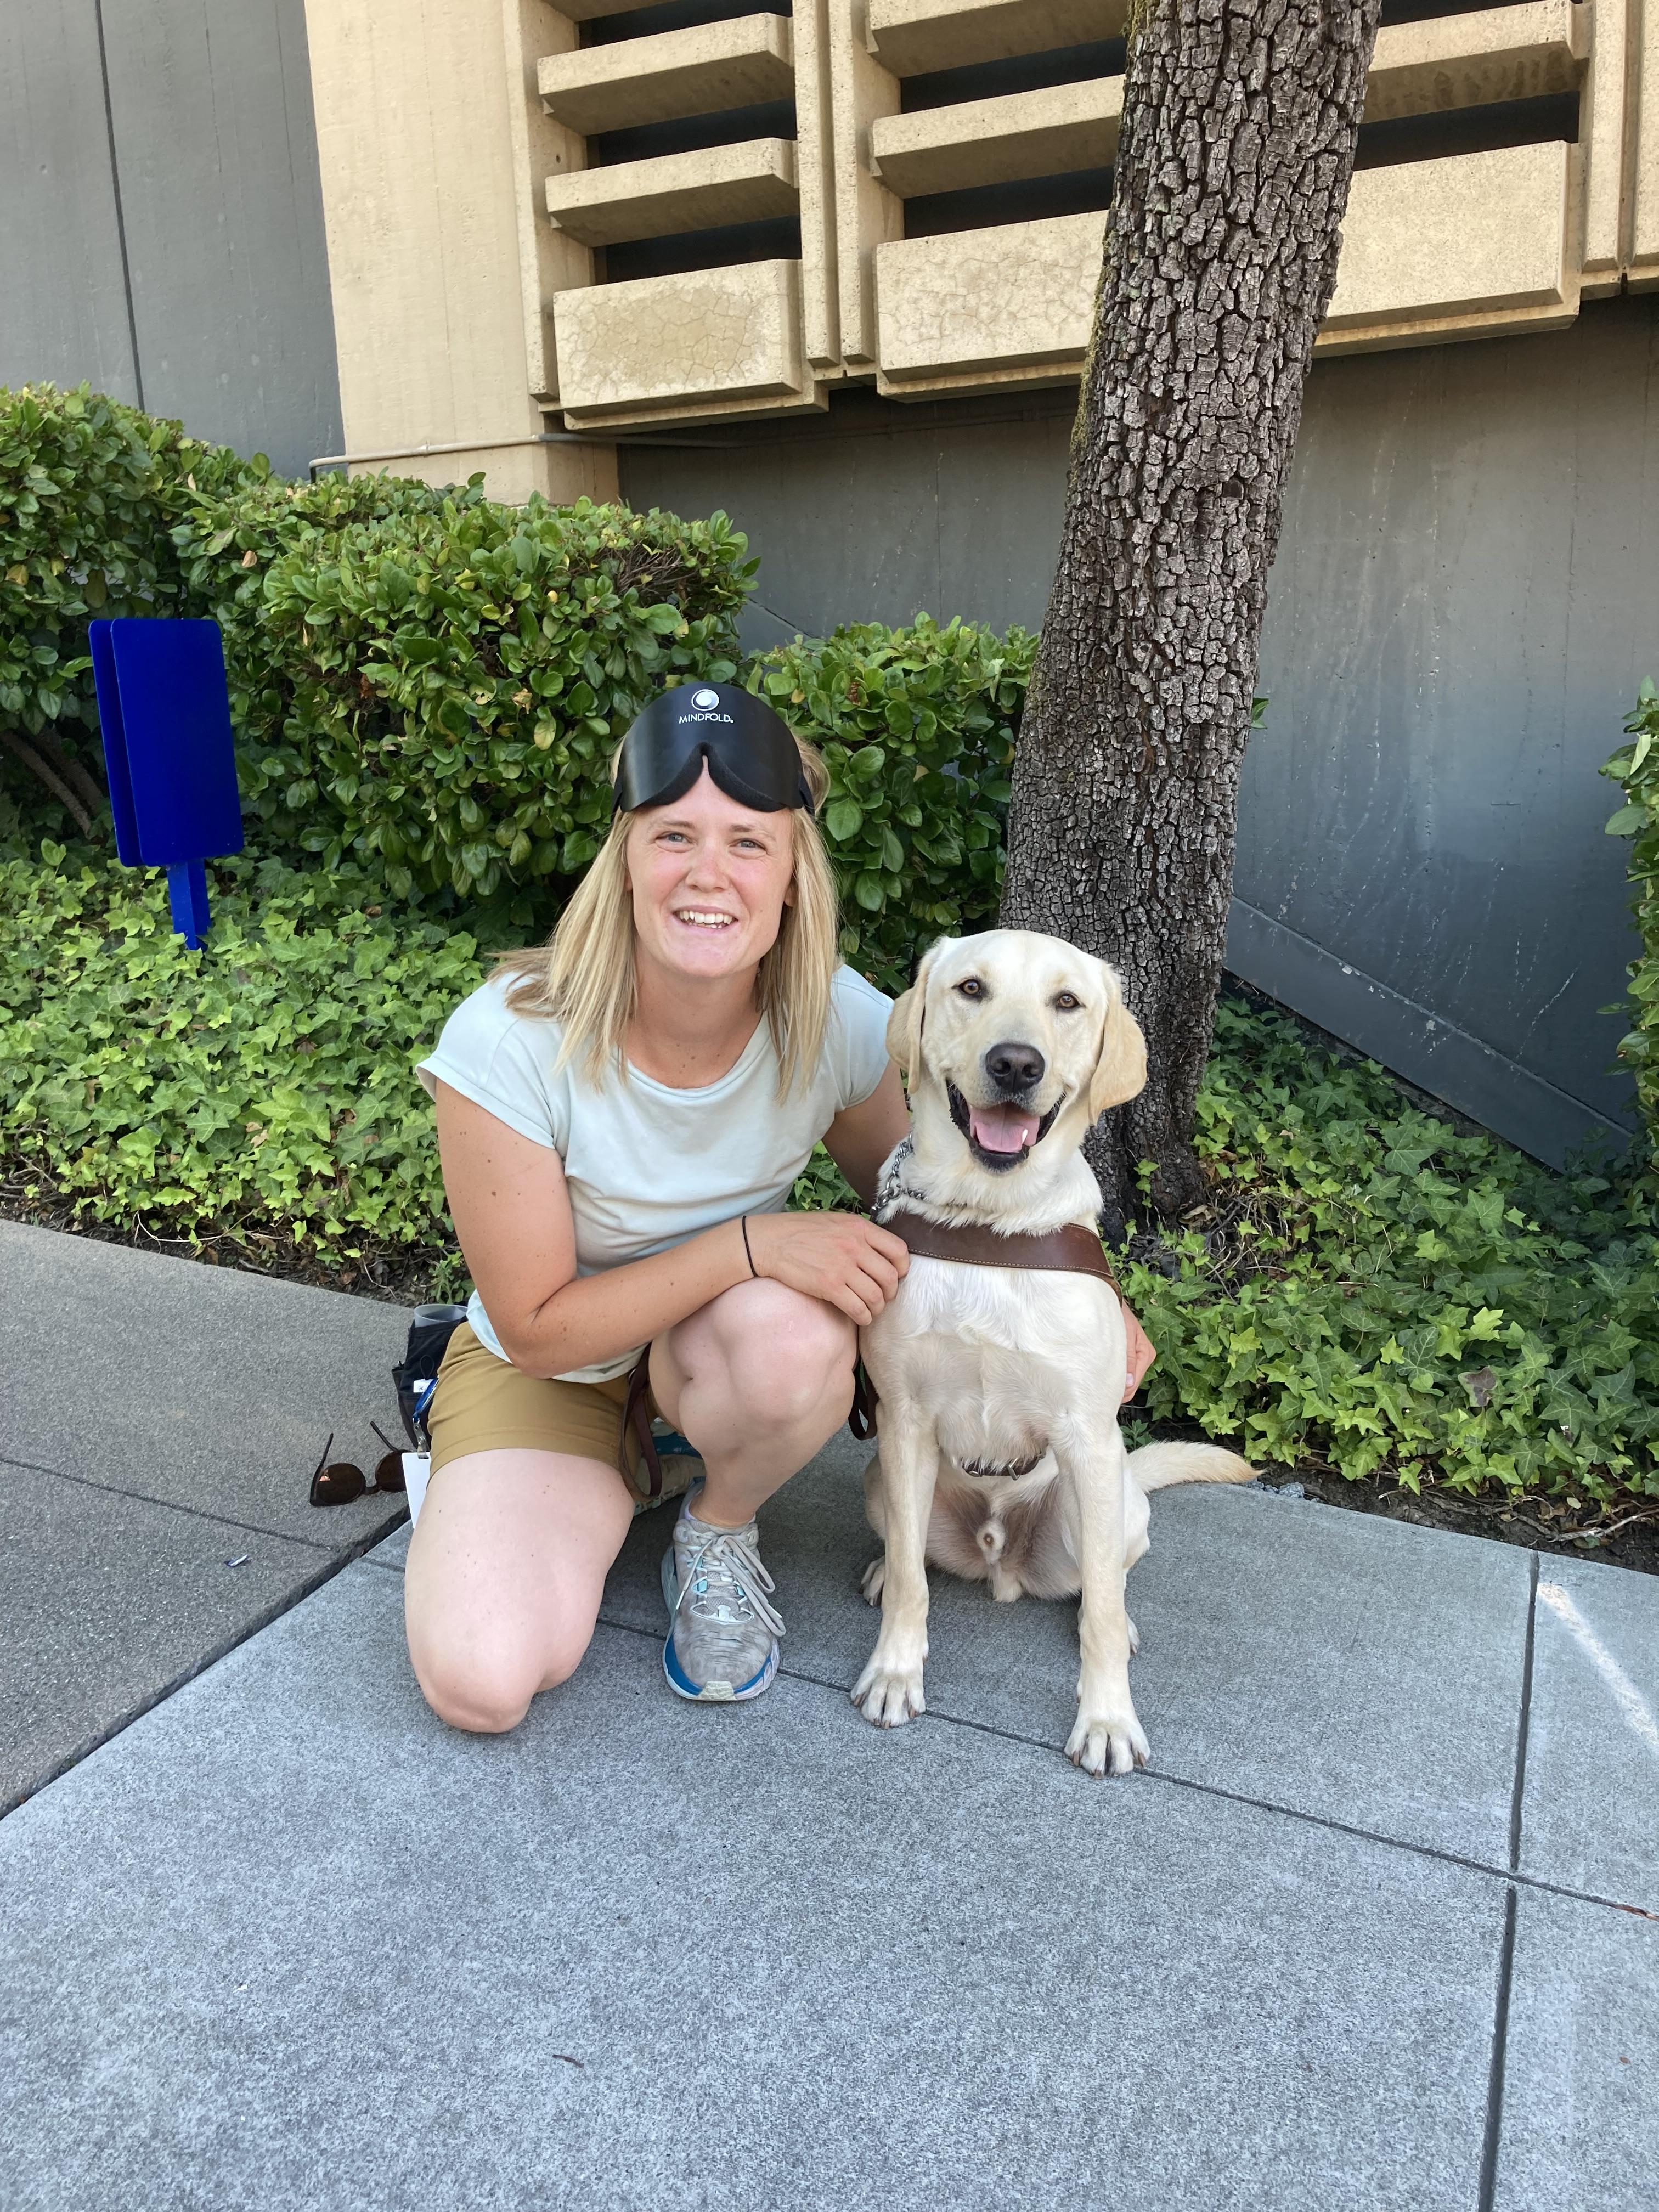 Jessica kneels beside a yellow Lab guide dog. She is wearing a blindfold flipped up on her head and both look smiling into the camera.